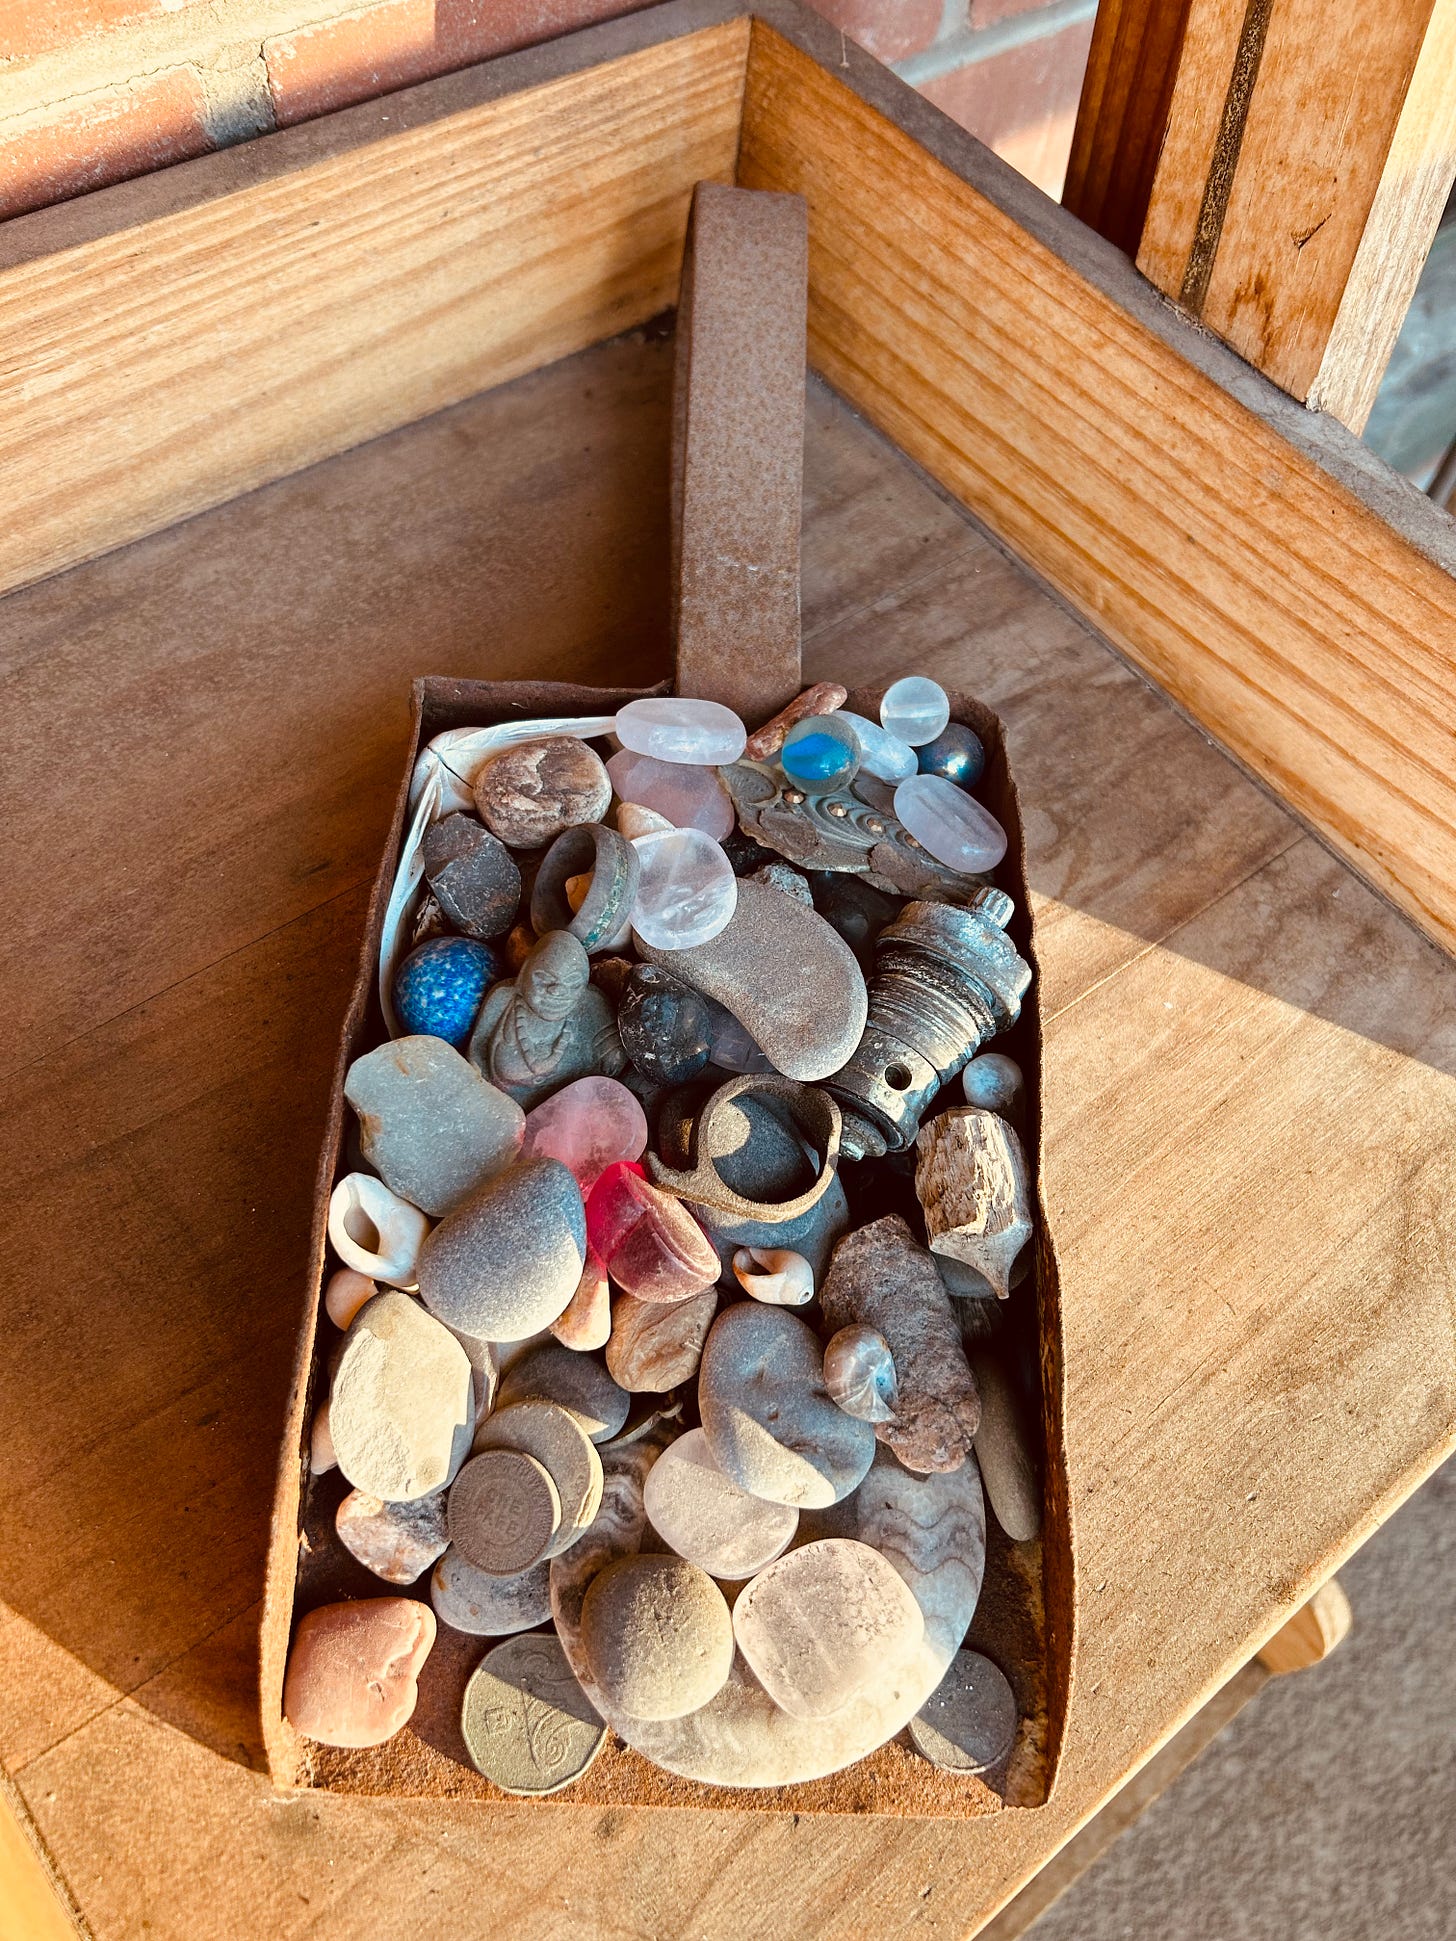 A shovel full of found objects: stones, bubble glass, rings, broach.